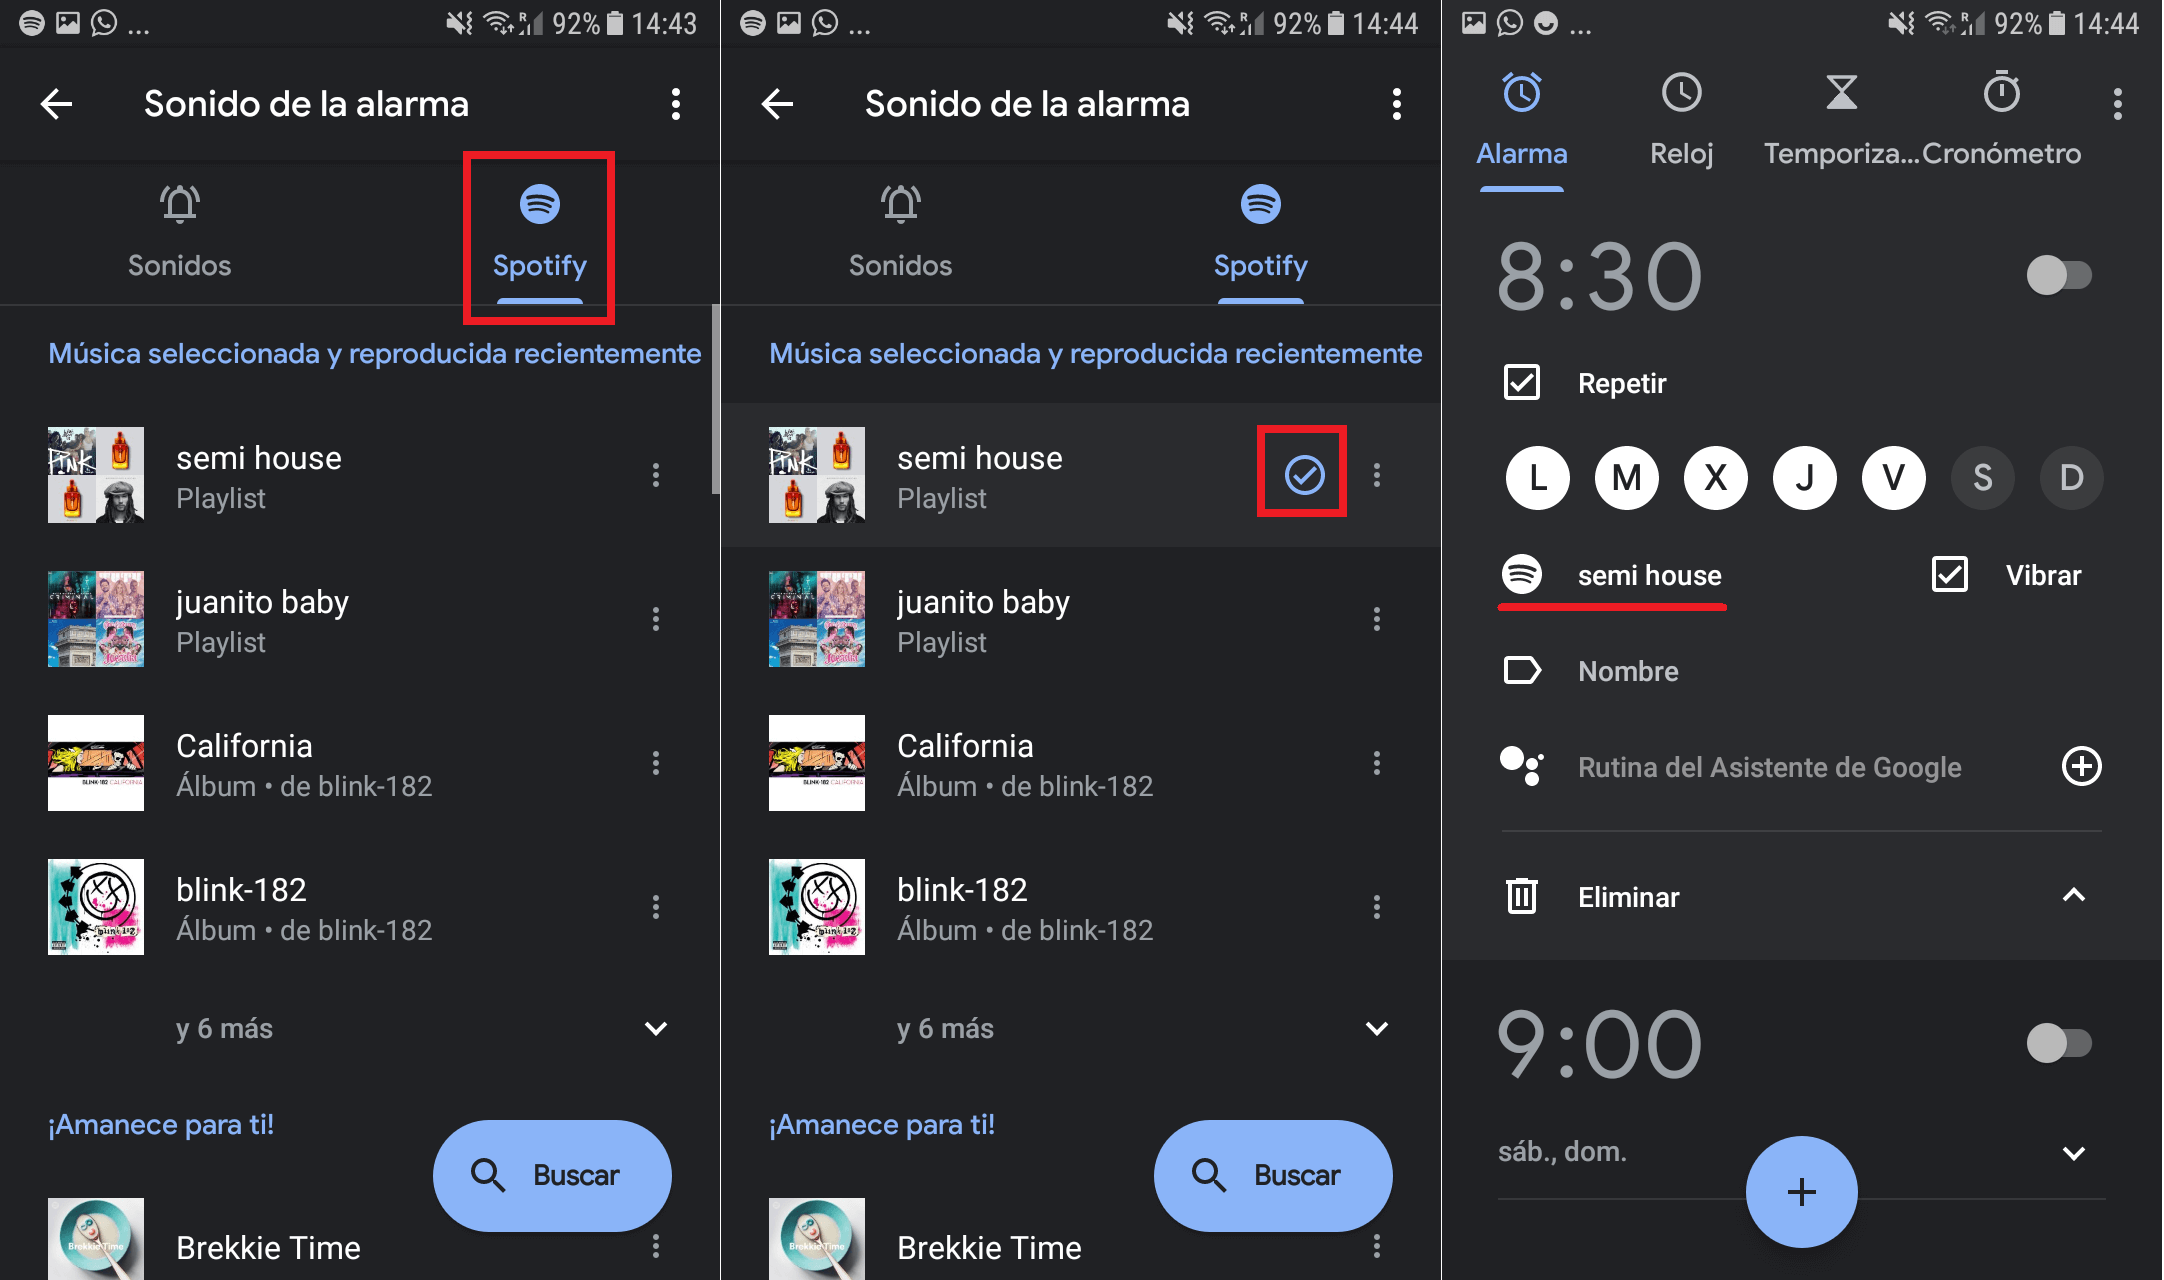 Alarm apps that work with spotify